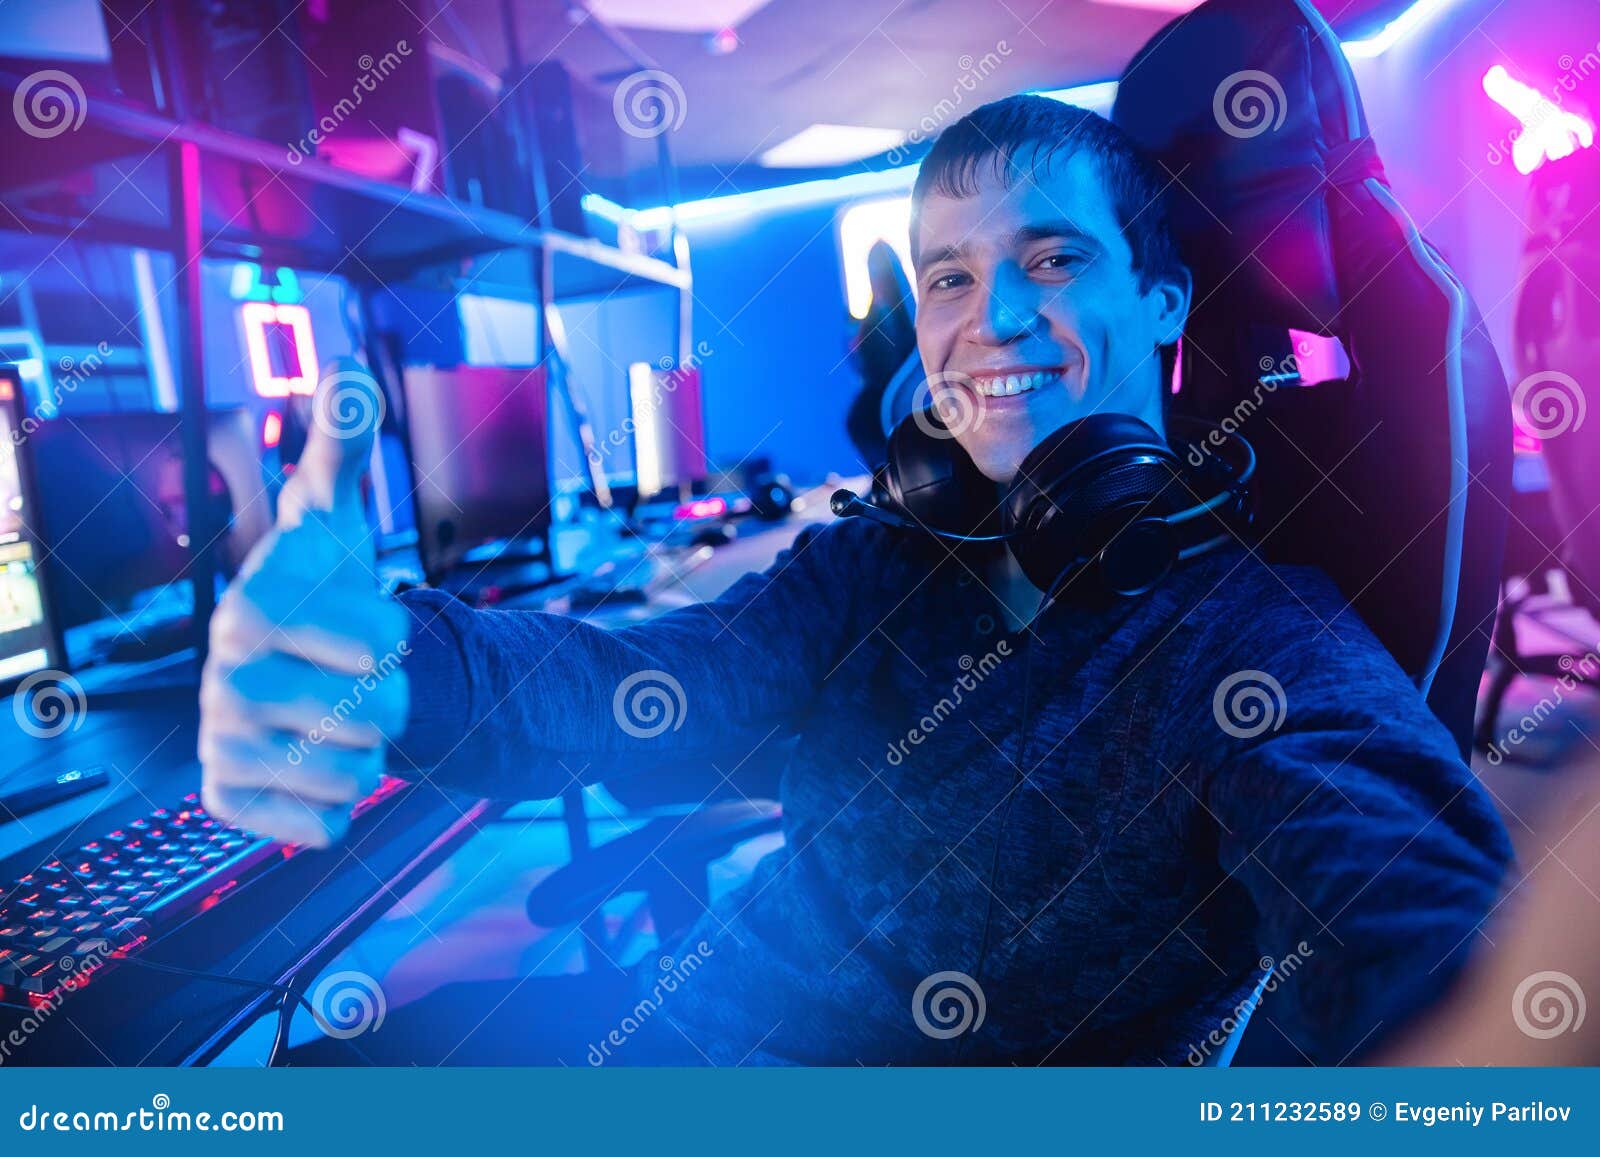 Professional Gamer Man Smile Making Selfie Photo and Playing Tournaments Online Video Games Computer with Headphones Stock Image